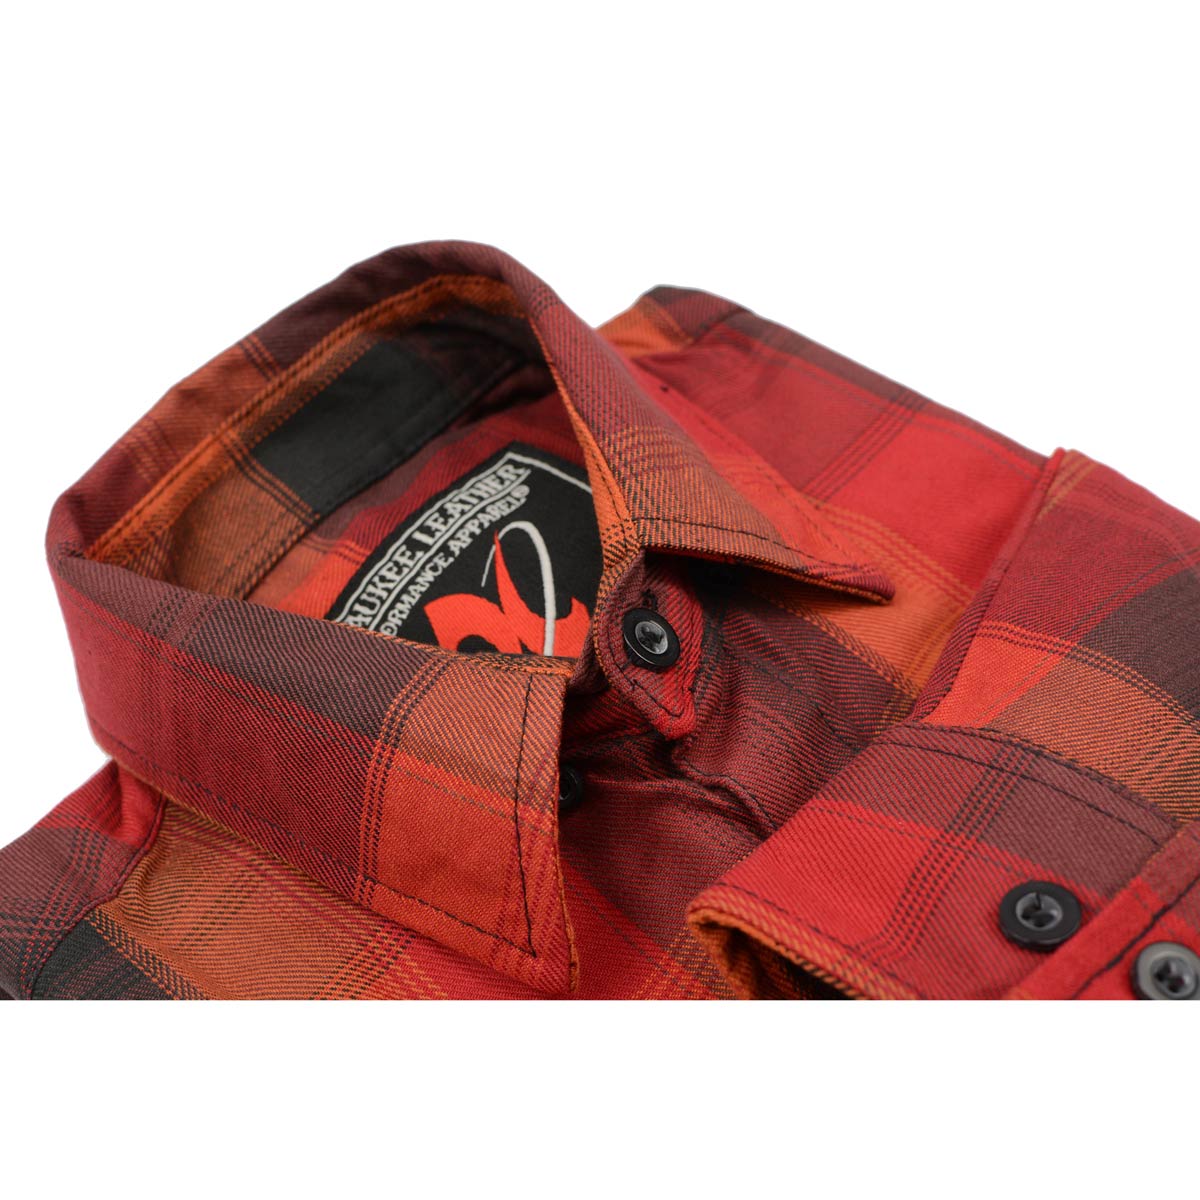 Milwaukee Leather Men's Flannel Plaid Shirt Orange with Red and Black Long Sleeve Cotton Button Down Shirt MNG11641